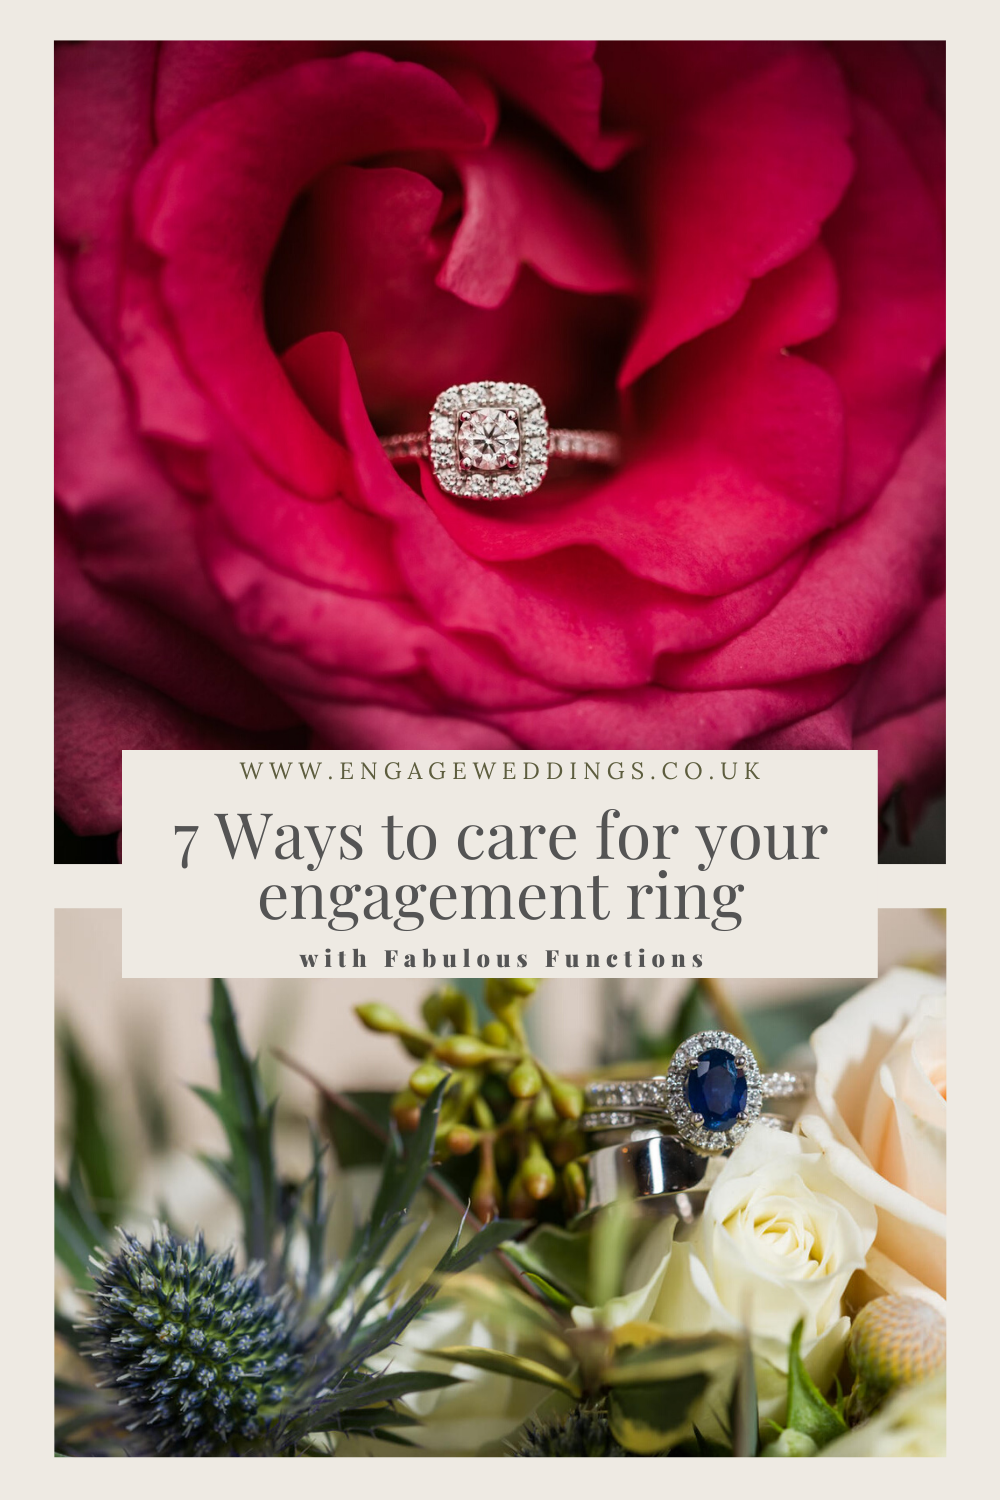 7 Ways to care for your engagement ring_engageweddings.co.uk